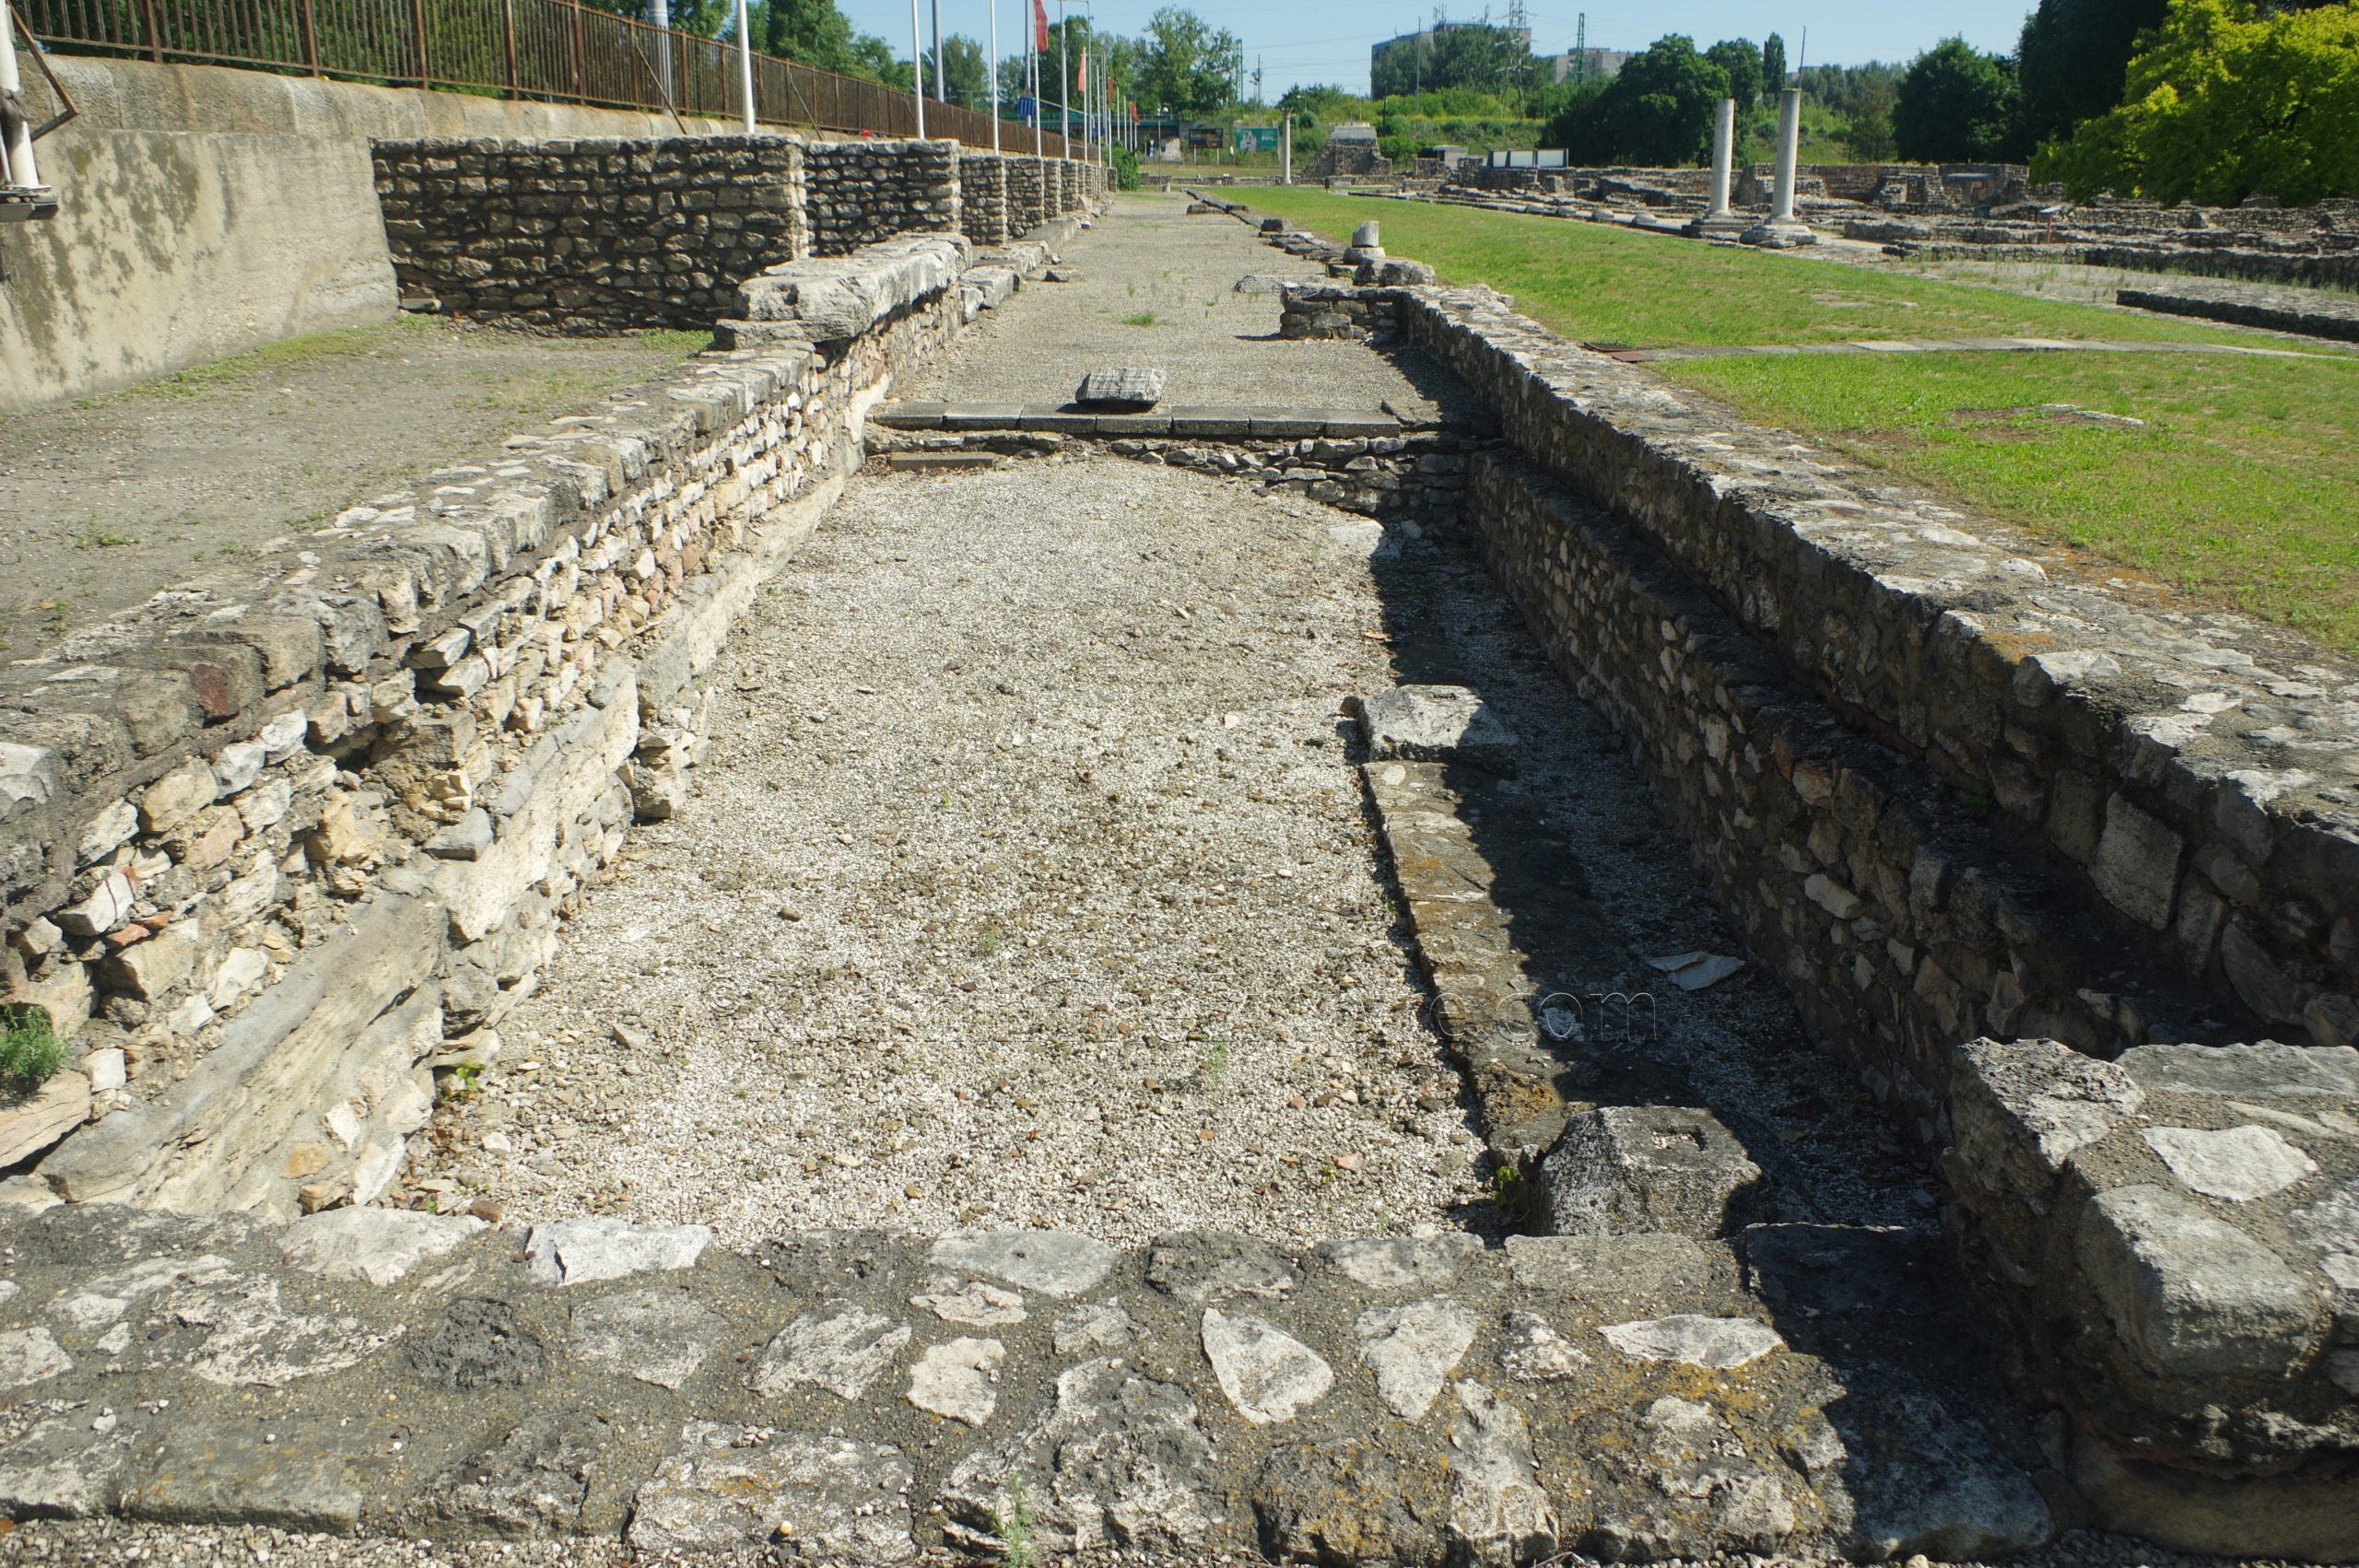 Tabernae on the west side of the cardo maximus, with excavated area showing an earlier construction of tabernae.